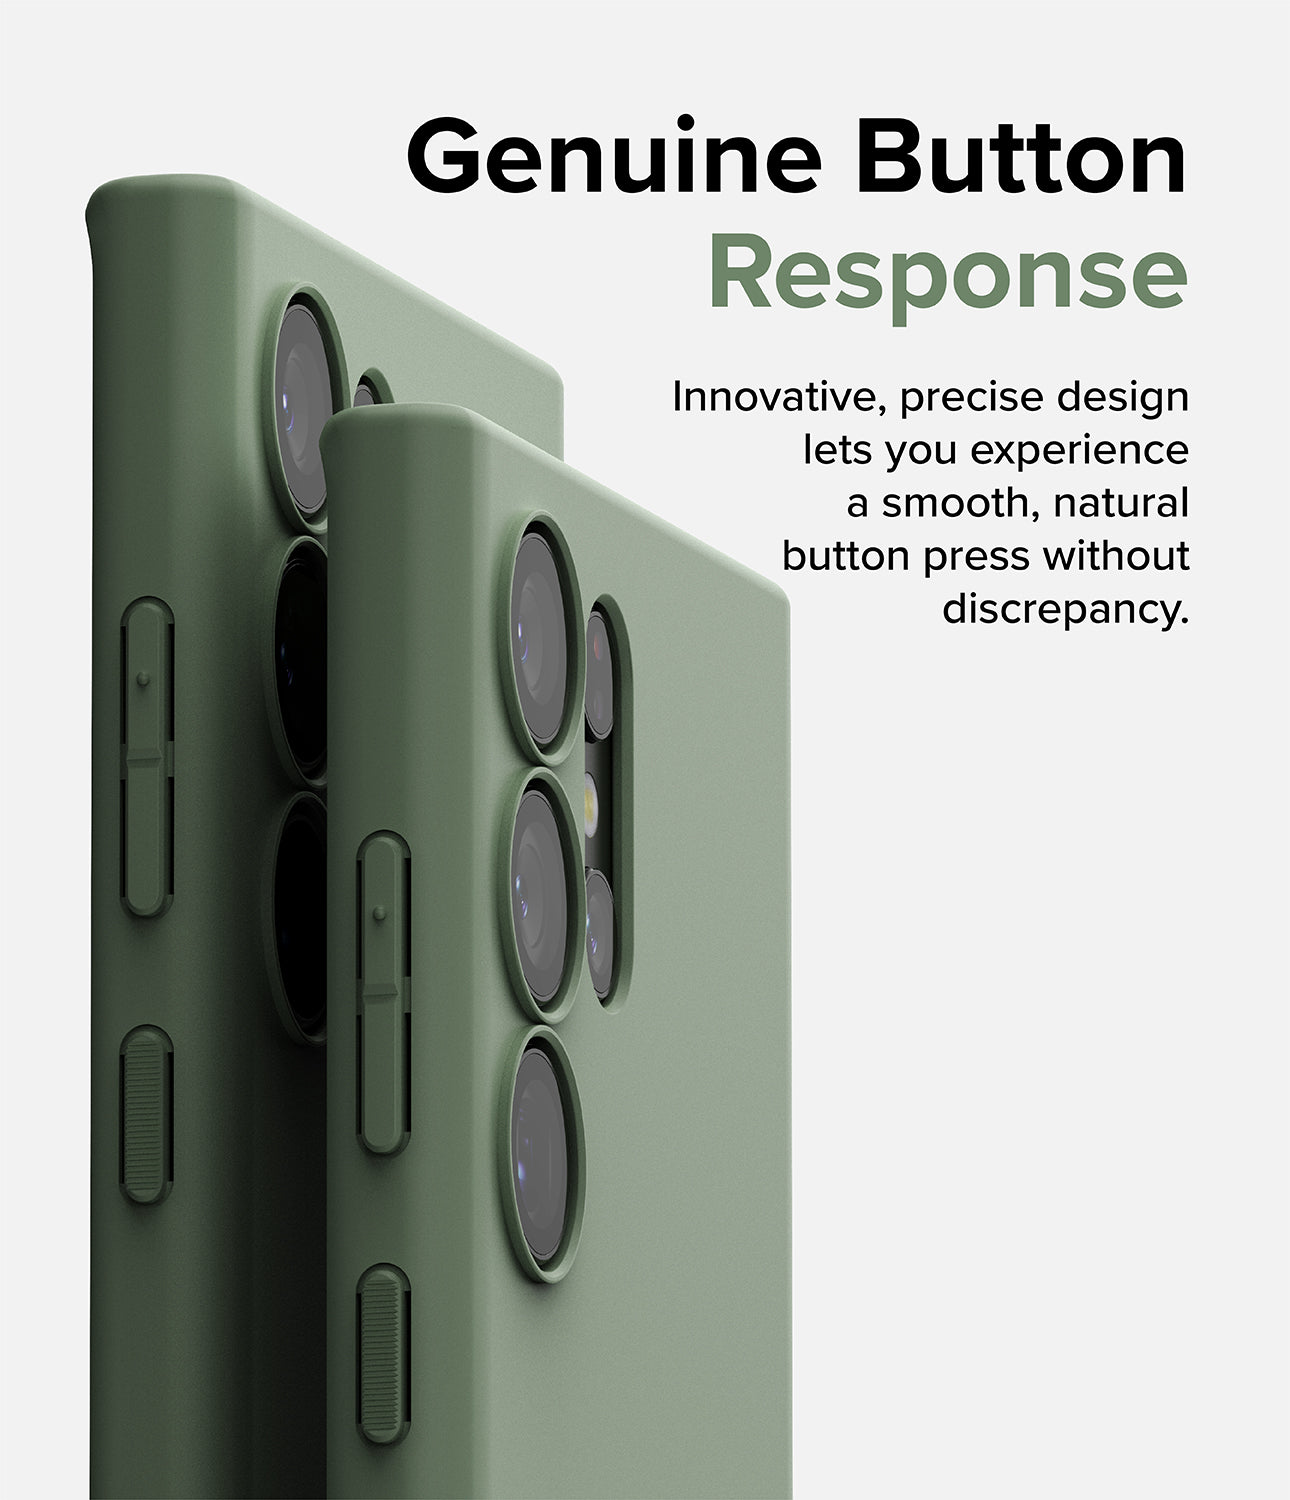 Galaxy S23 Ultra Case | Air-S Quite Green - Genuine Button Response. Innovative, precise design lets you experience a smooth, natural button press without discrepancy.